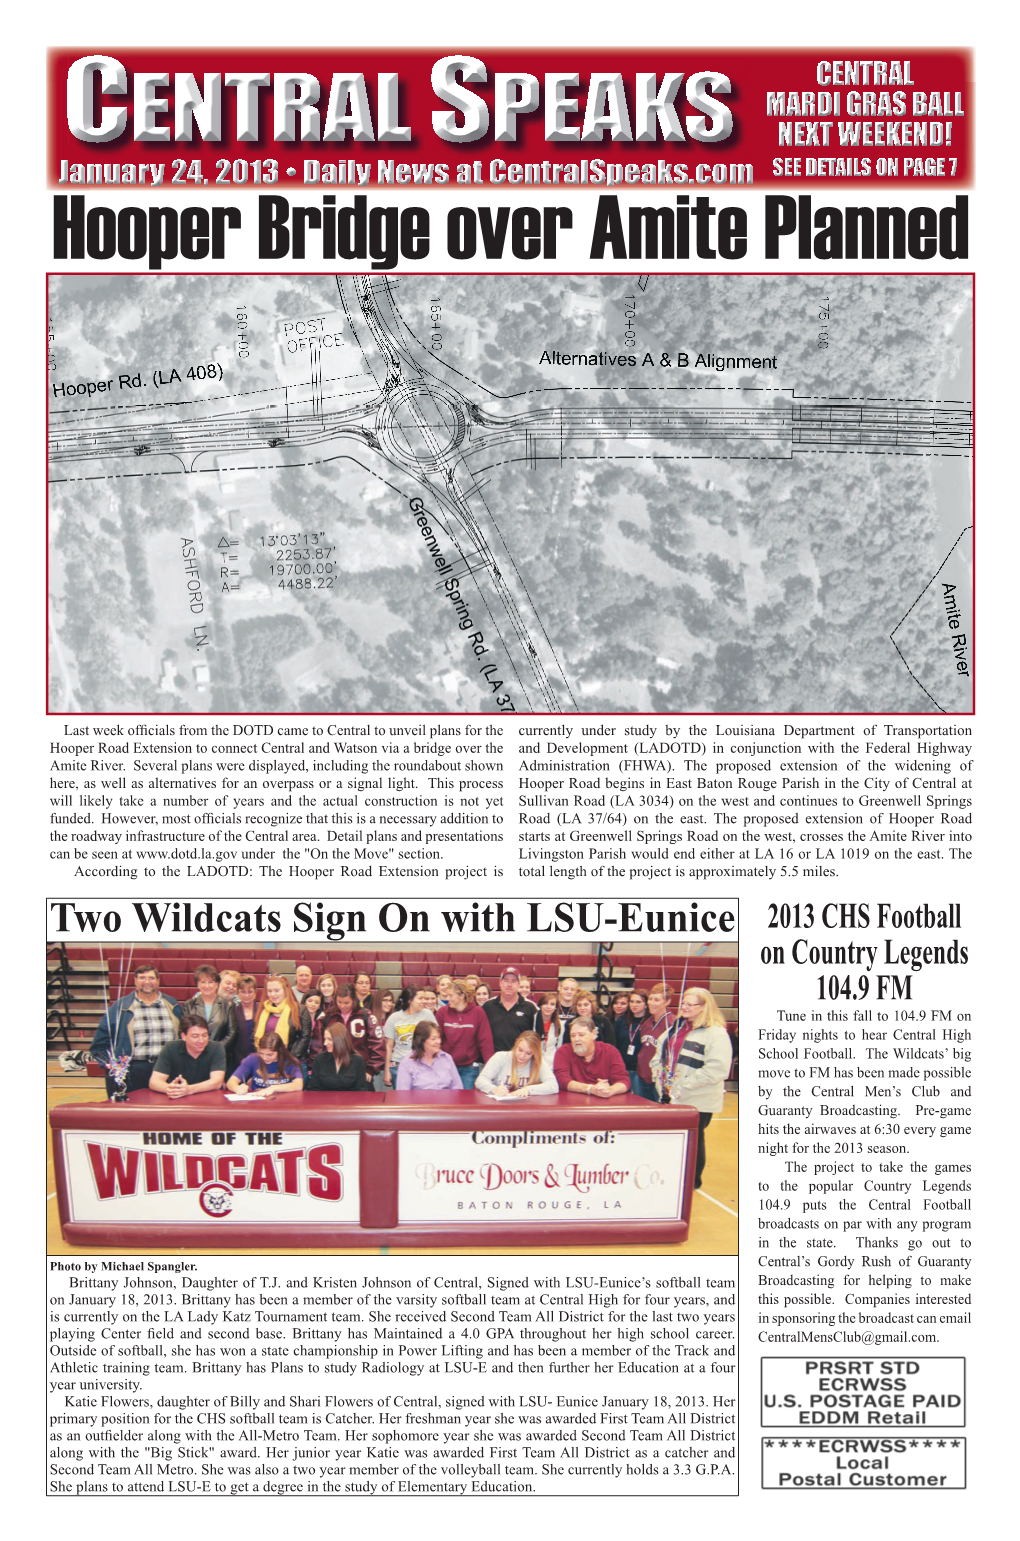 Two Wildcats Sign on with LSU-Eunice 2013 CHS Football on Country Legends 104.9 FM Tune in This Fall to 104.9 FM on Friday Nights to Hear Central High School Football